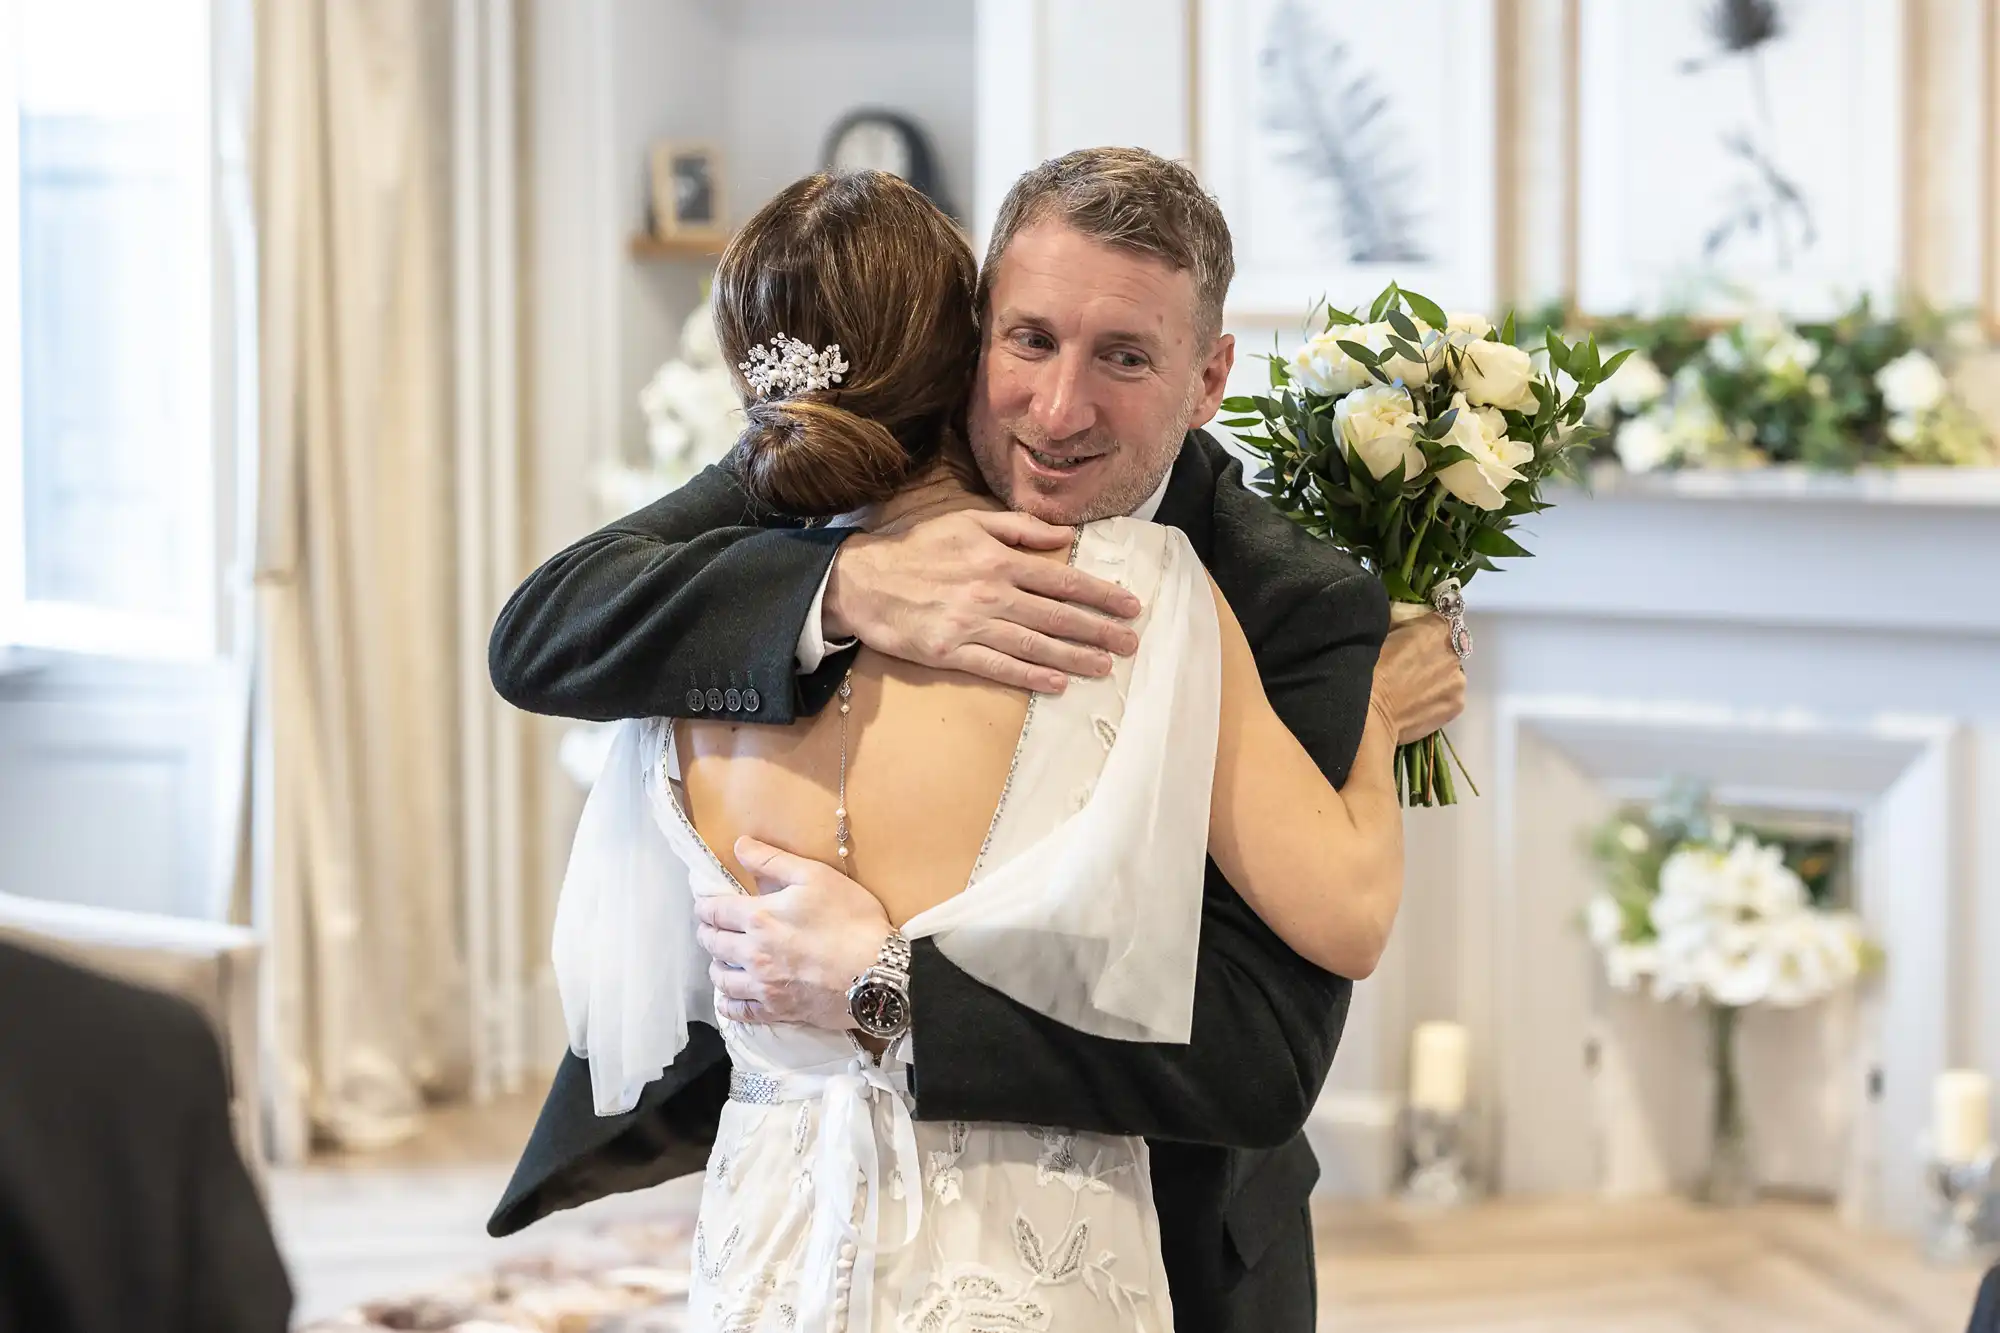 A man in a suit hugs a woman in a white dress holding a bouquet of flowers in a warmly decorated room.